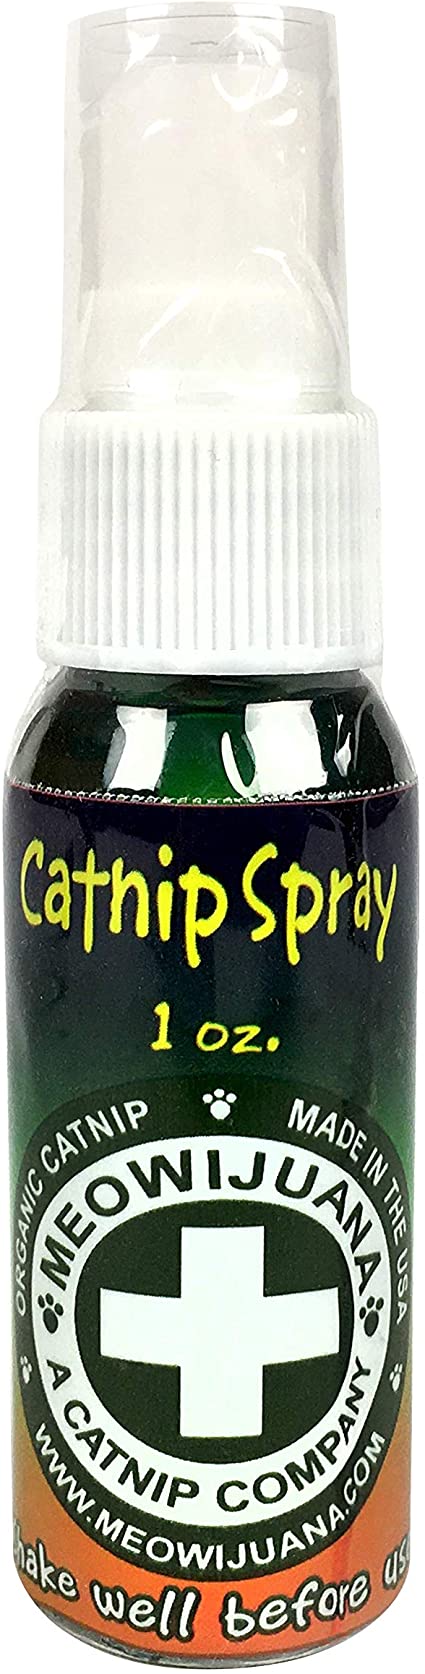 Meowijuana Catnip Spray - 1 oz. Bottle - for Use On Cat Toys, Teasers, and Scratchers